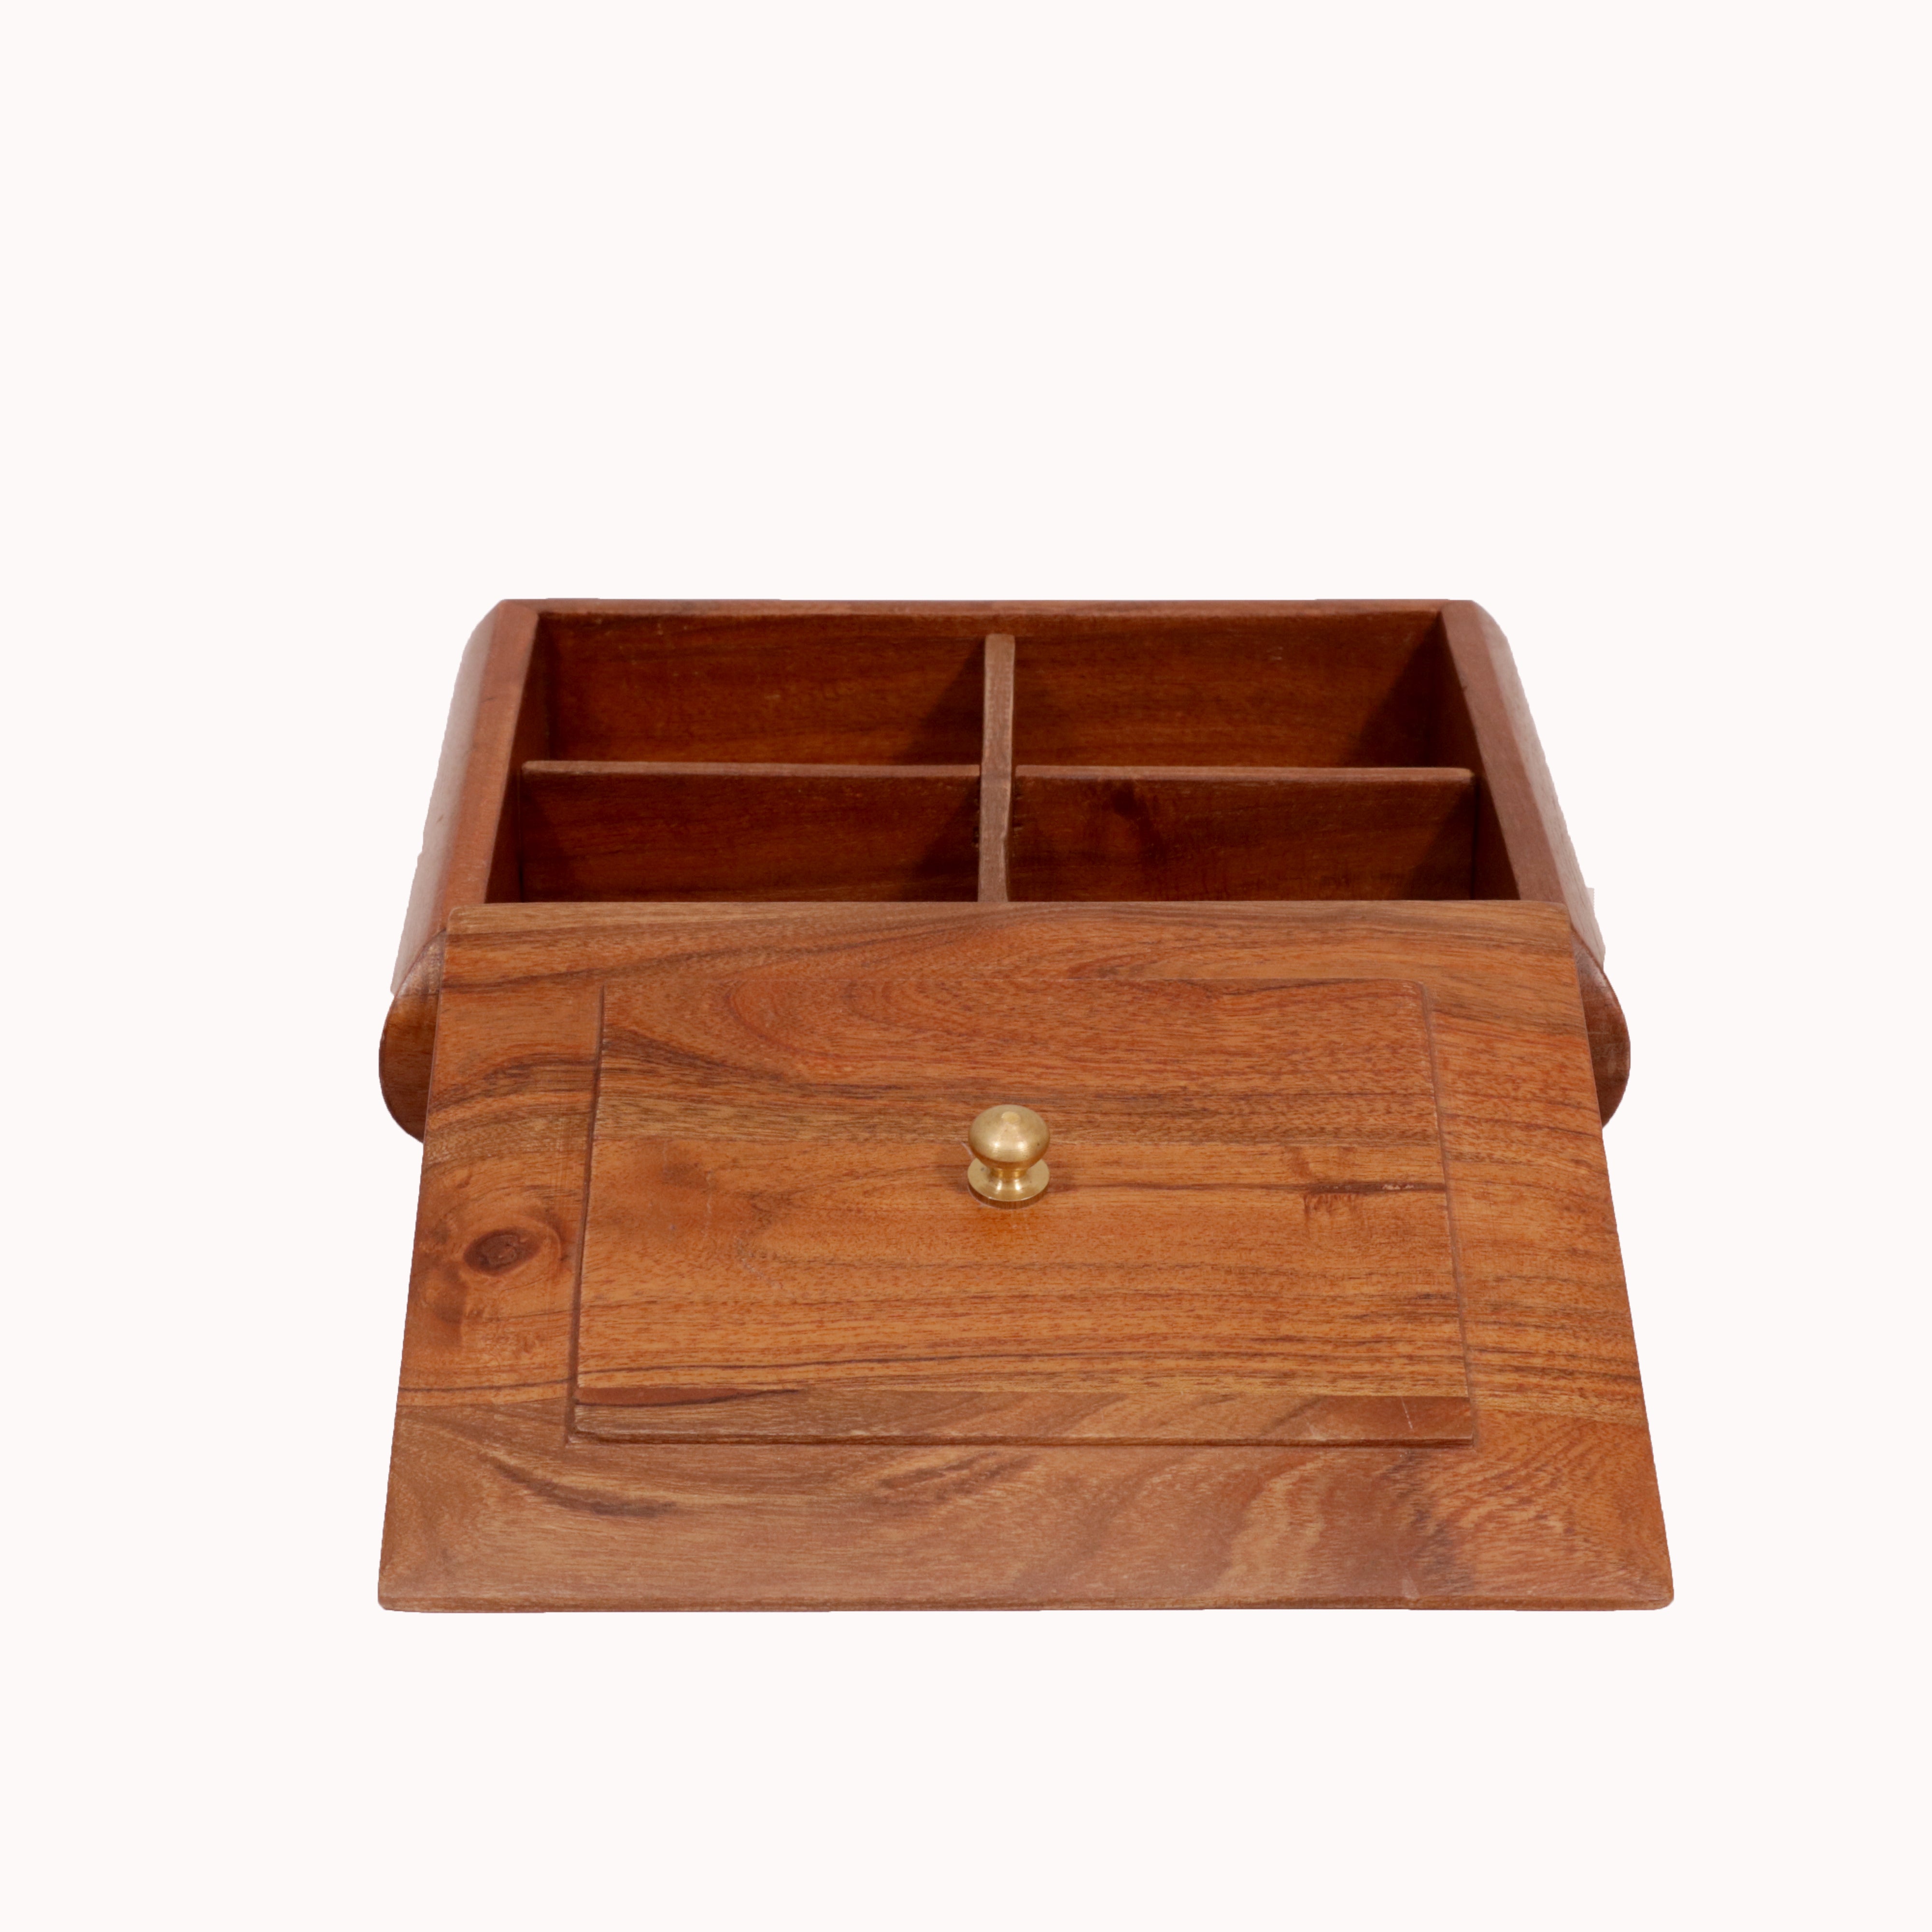 Rounded Sides Wooden Box Wooden Box